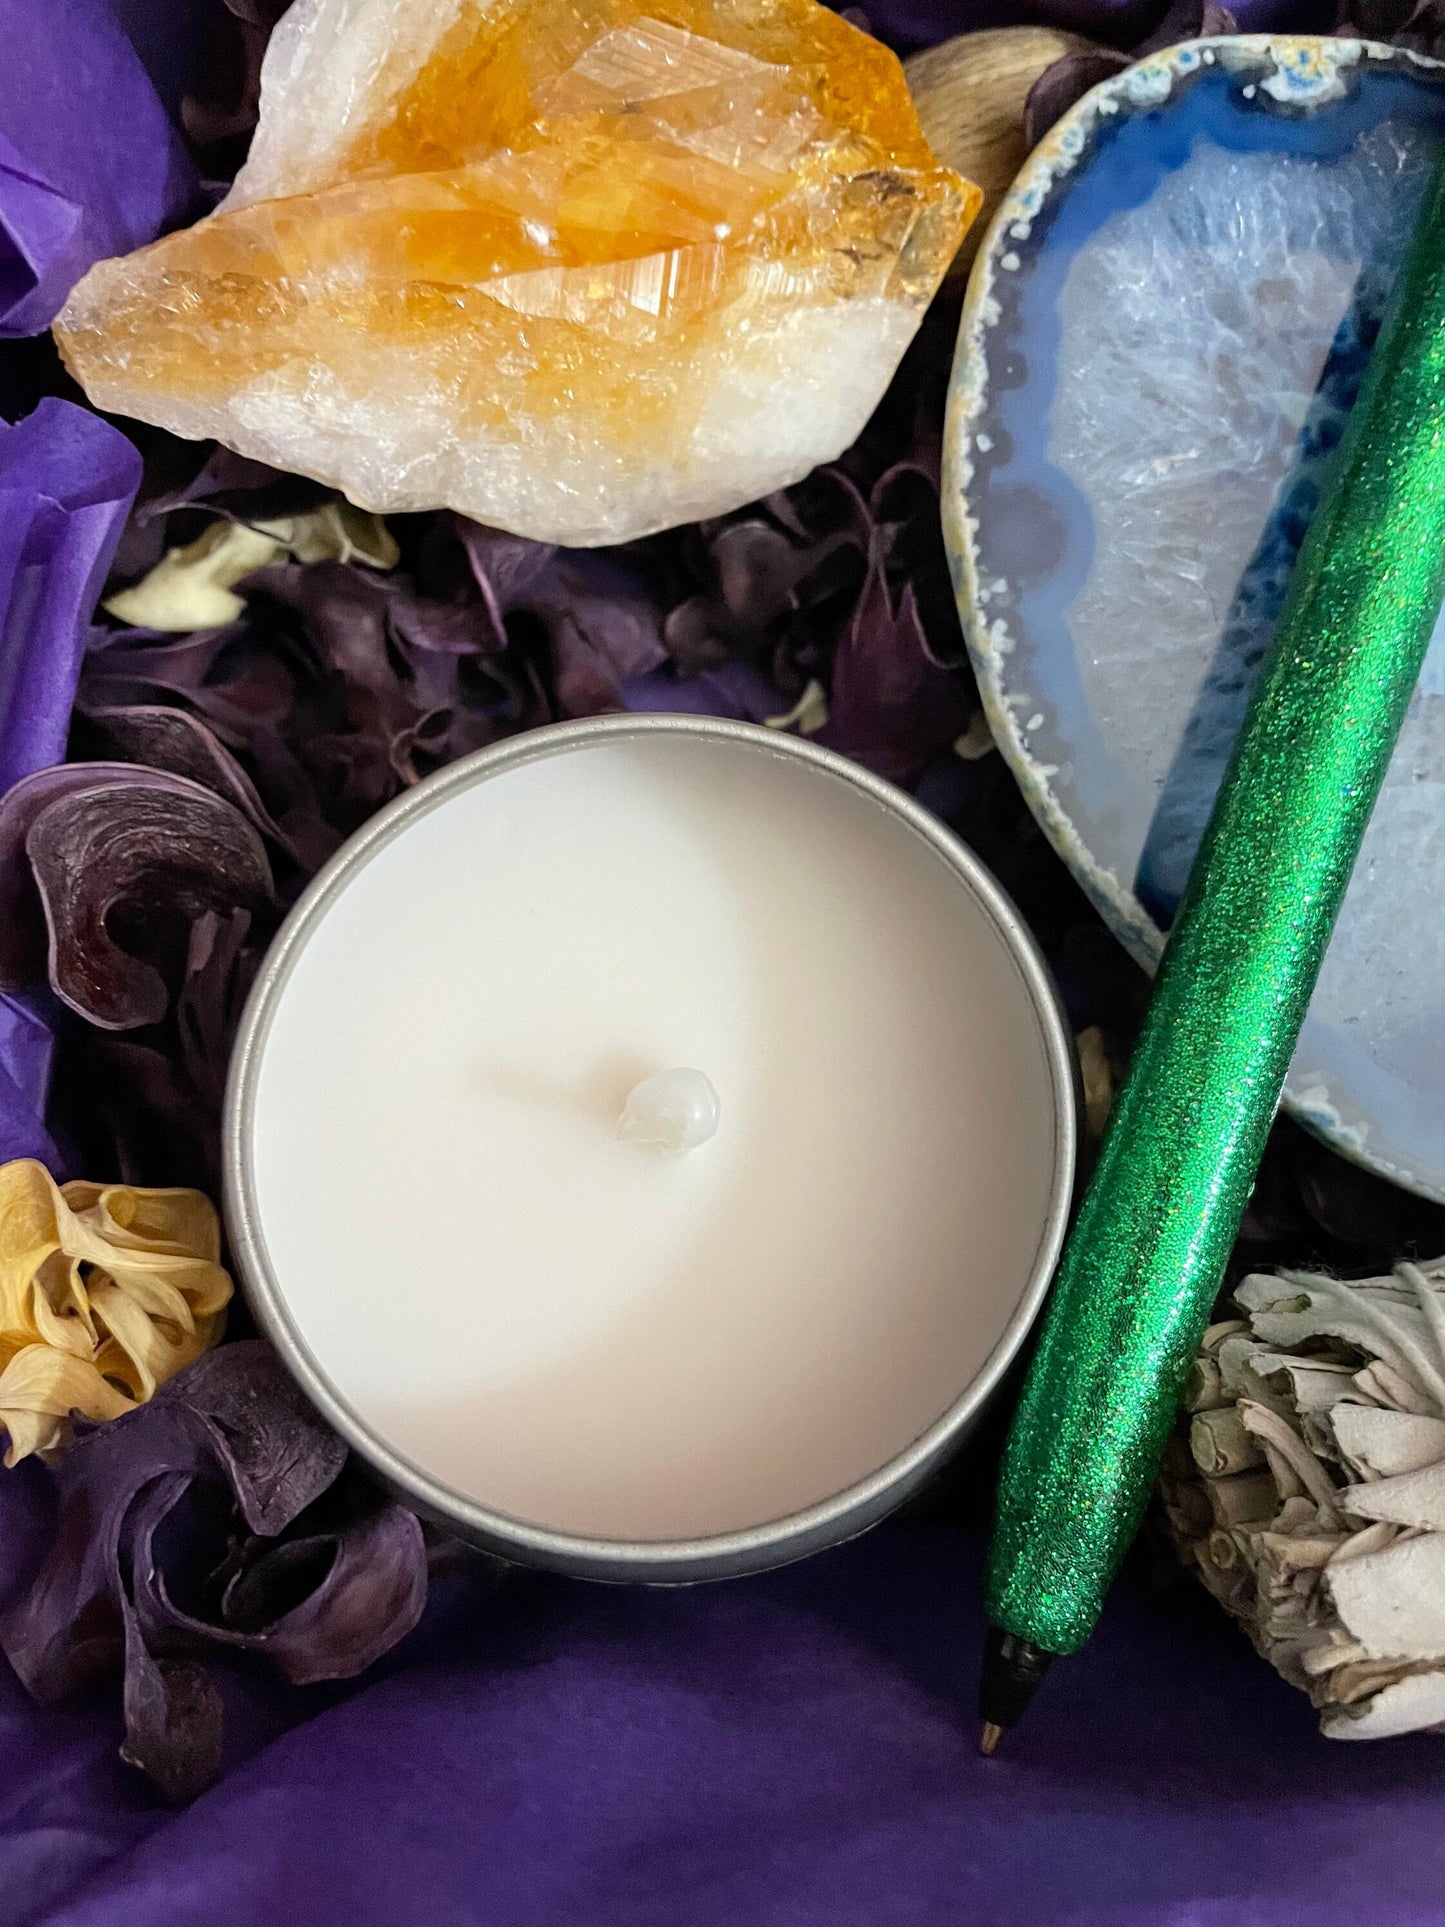 Deluxe Crystal Resilience Gift Box to help each of us to heal